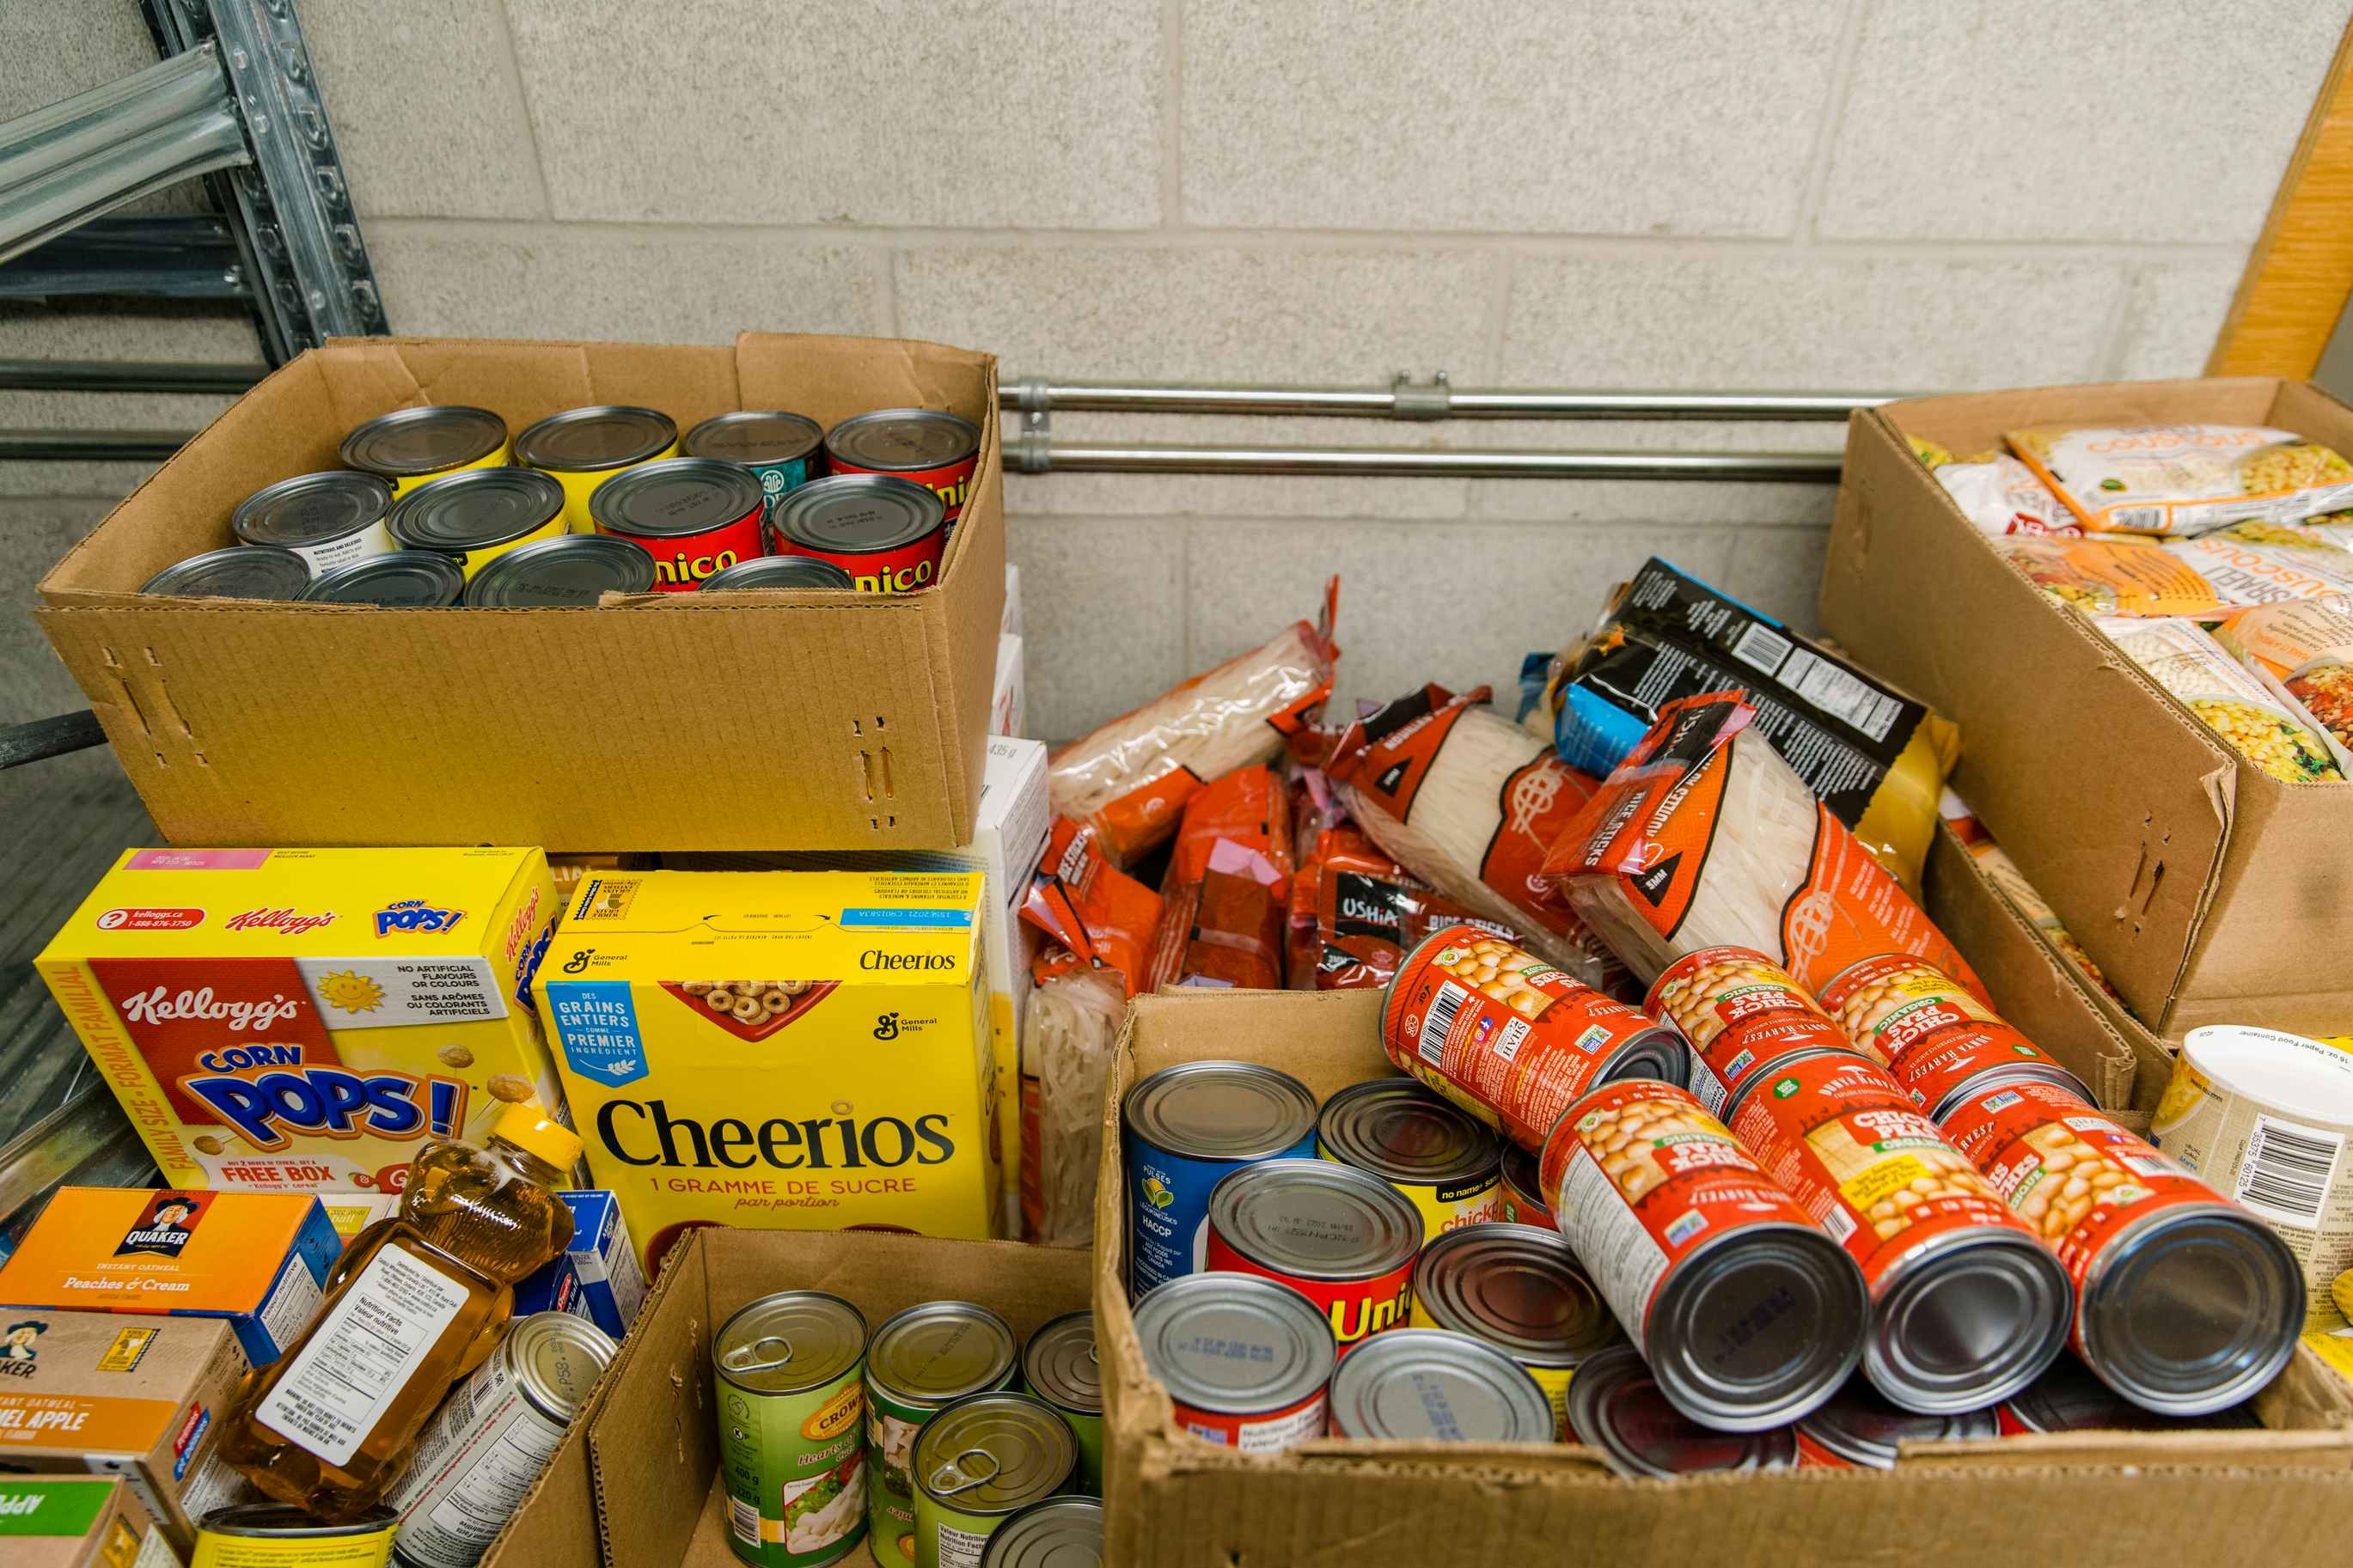 Food bank donations with boxes of shelf-stable foods